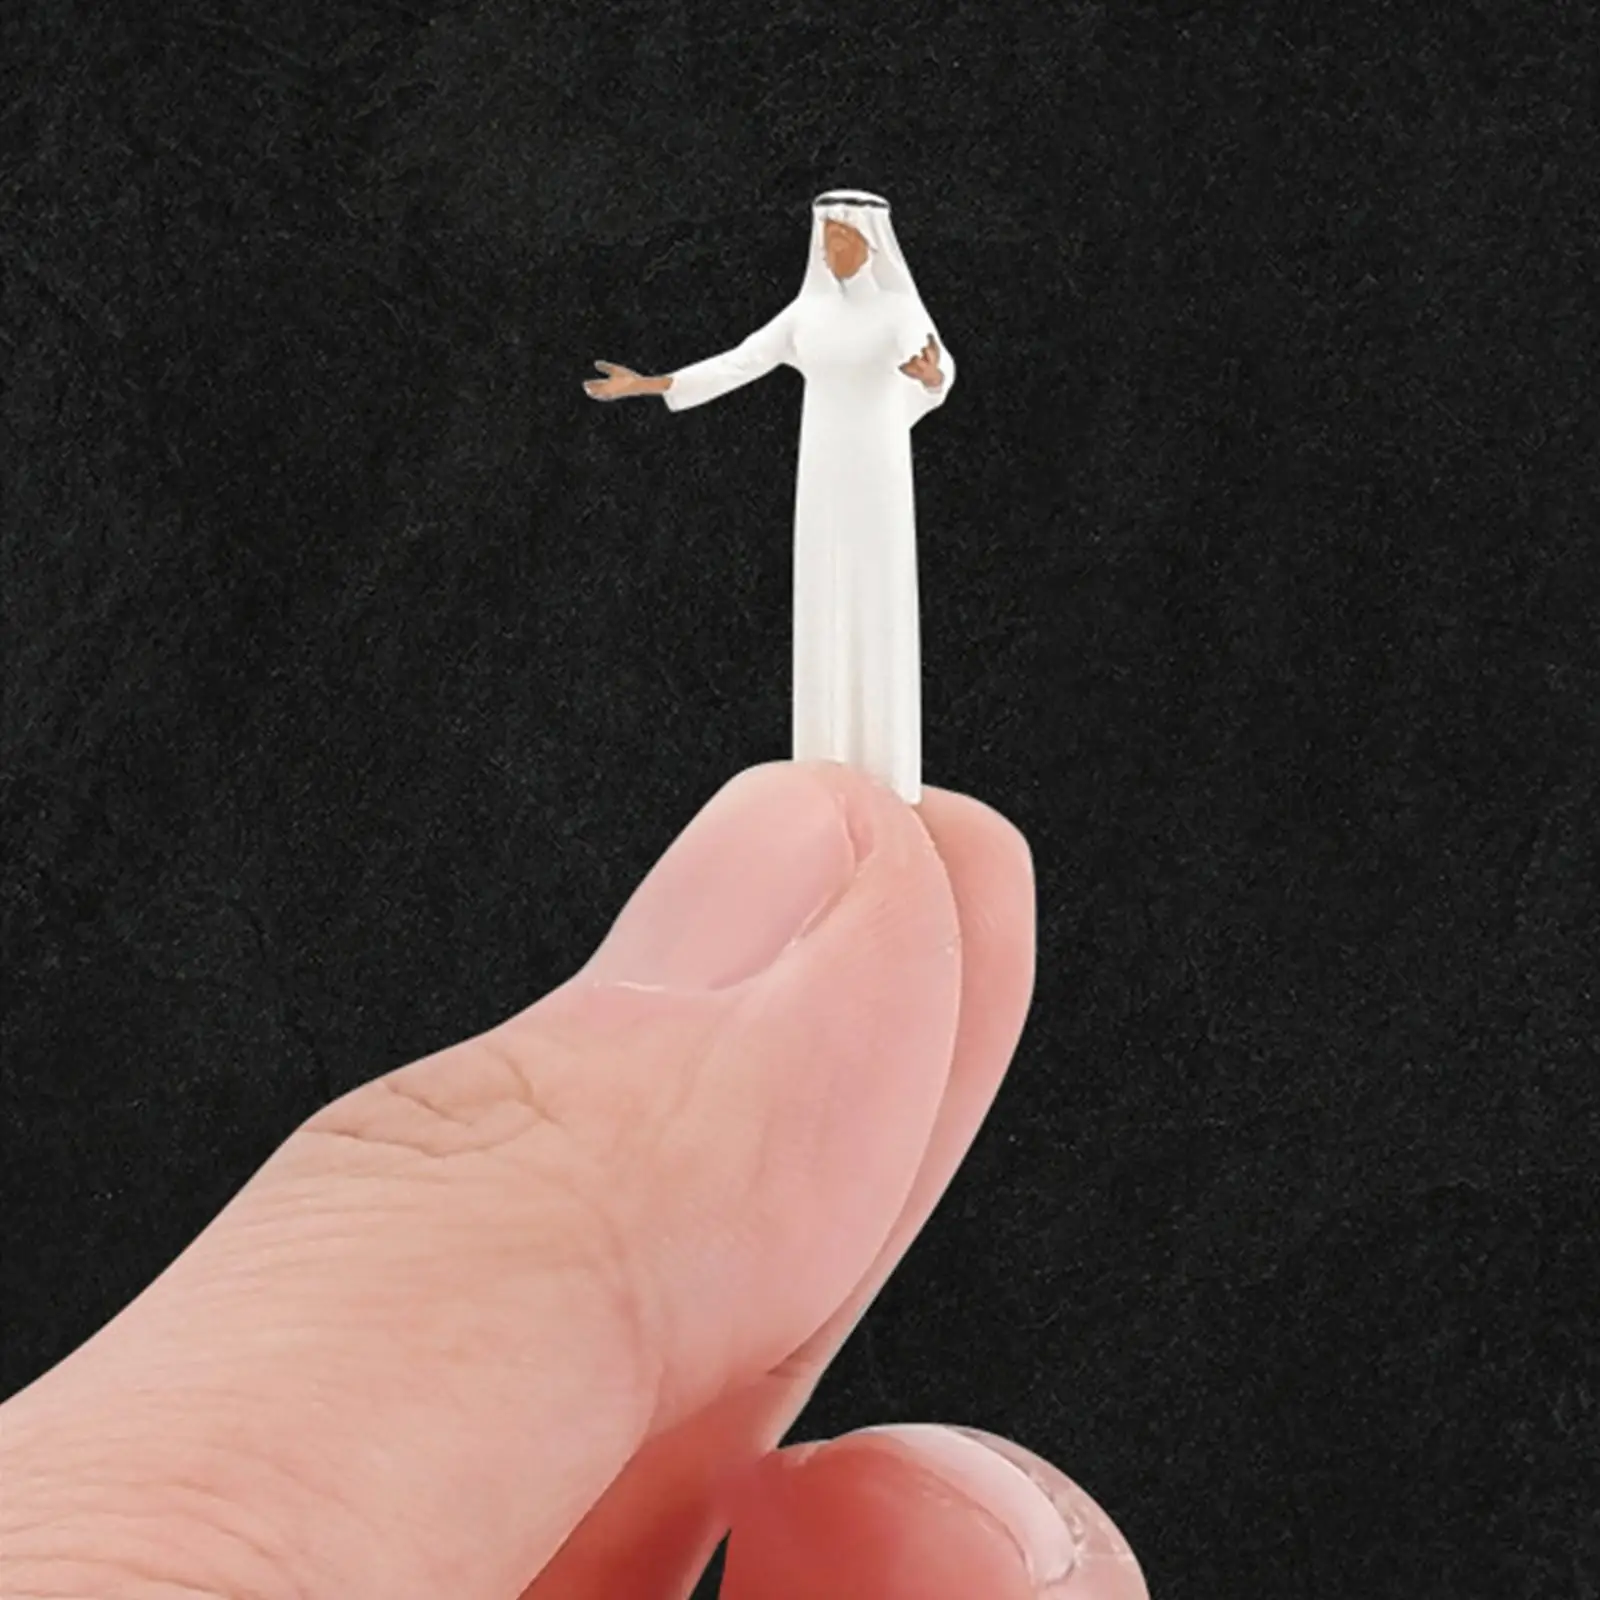 Miniature 1/64 People Figures Tiny People Model DIY Crafts Hand Painted Resin for Photography Props Layout